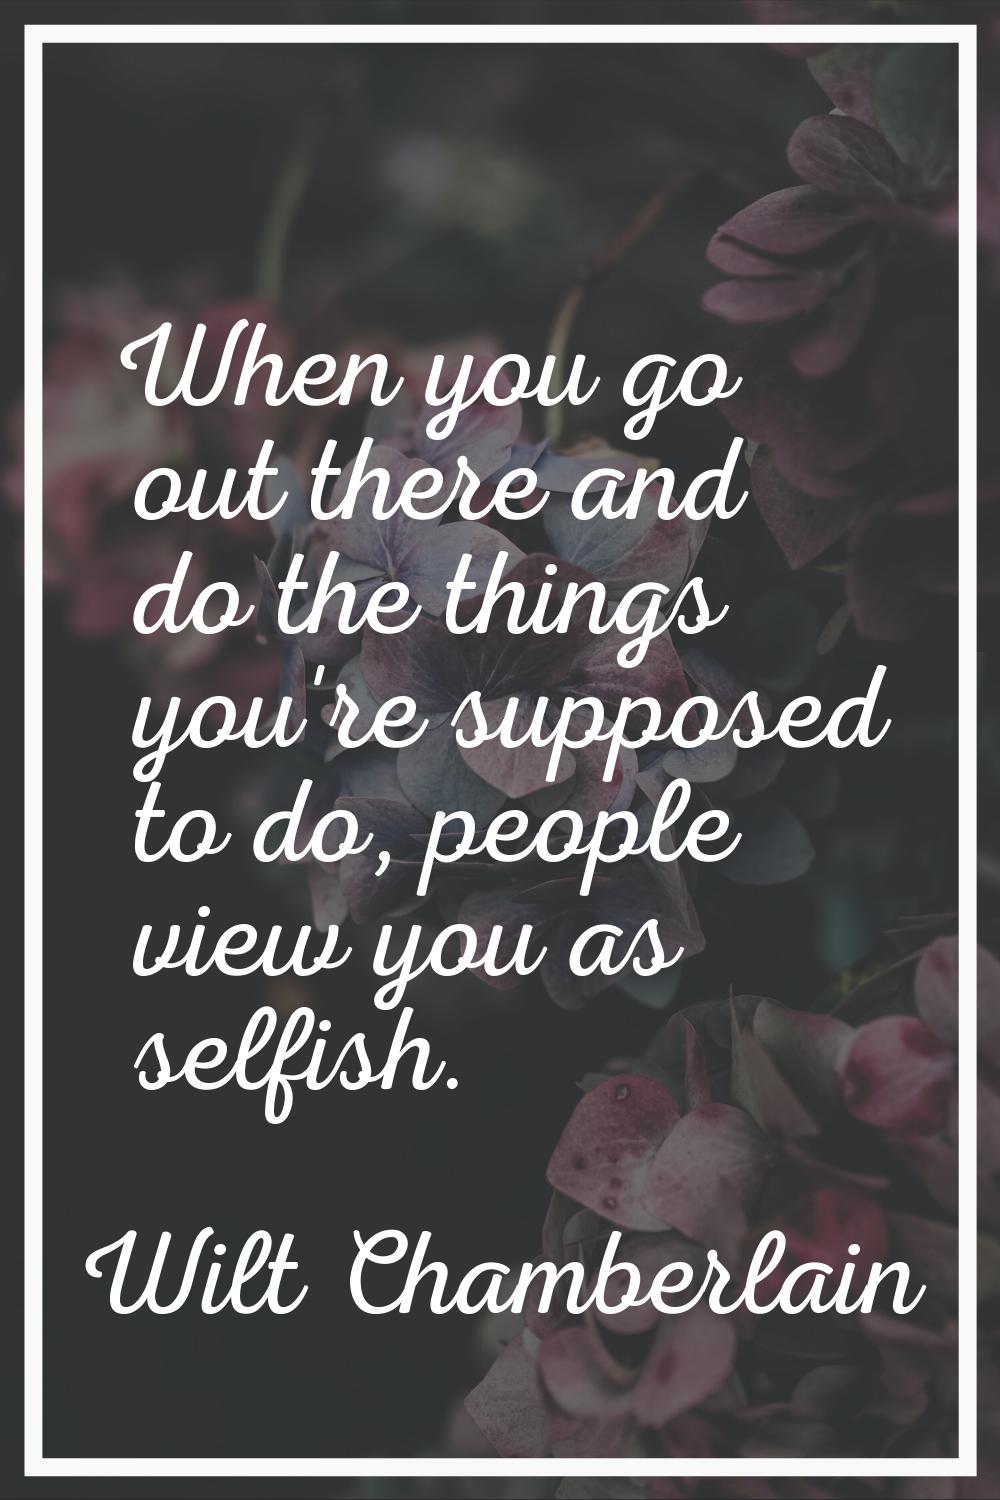 When you go out there and do the things you're supposed to do, people view you as selfish.